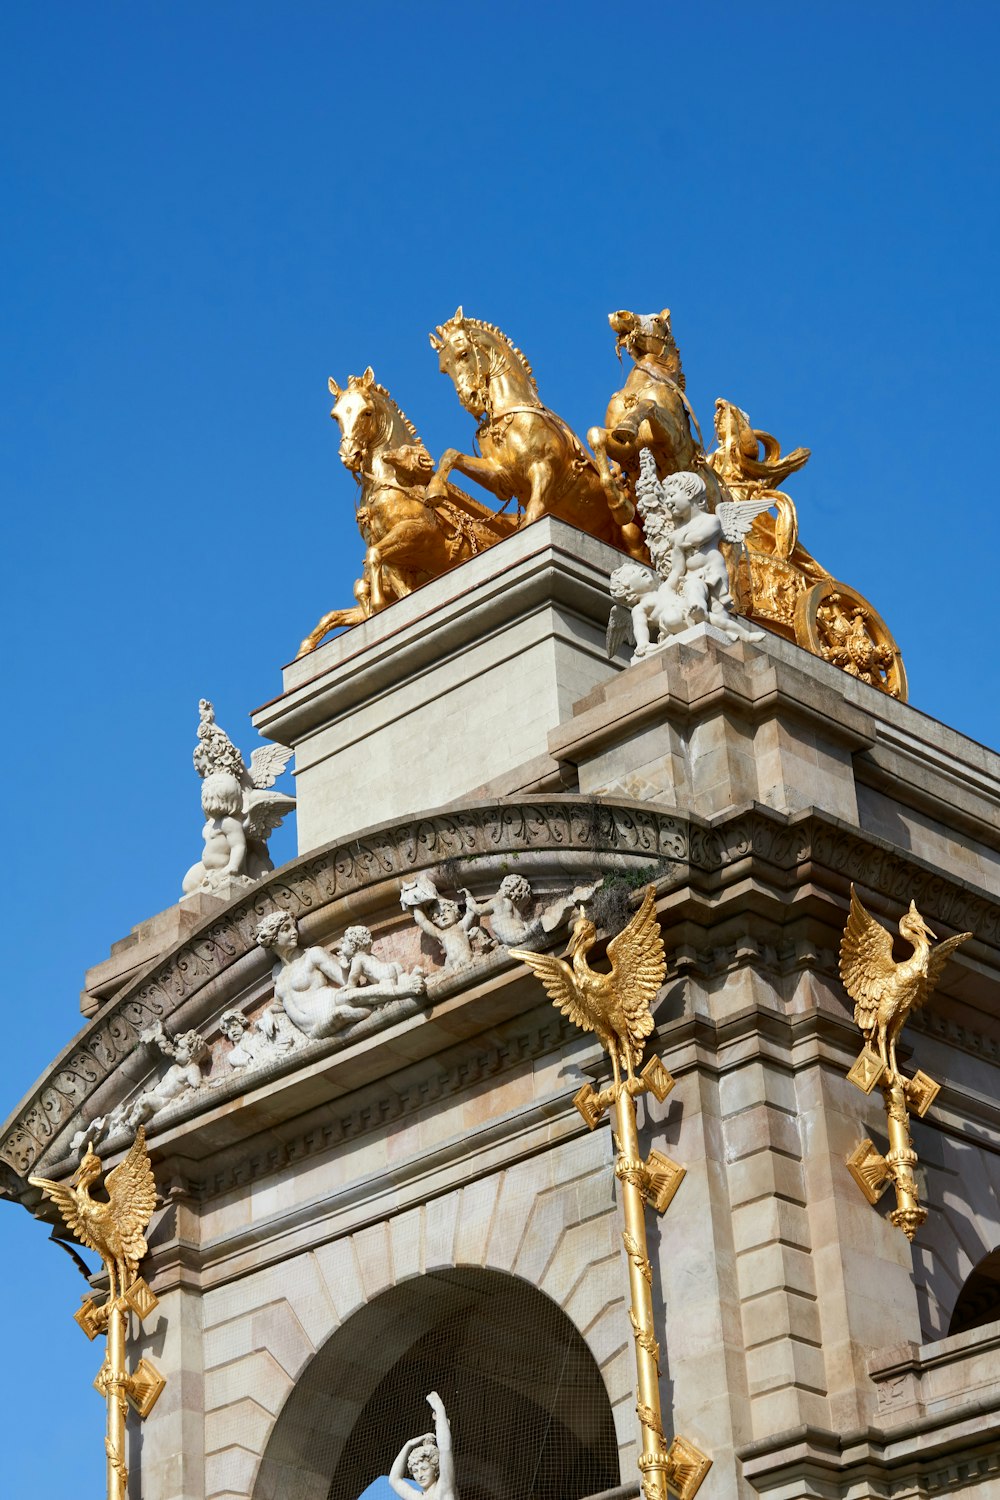 a clock tower with gold statues on top of it